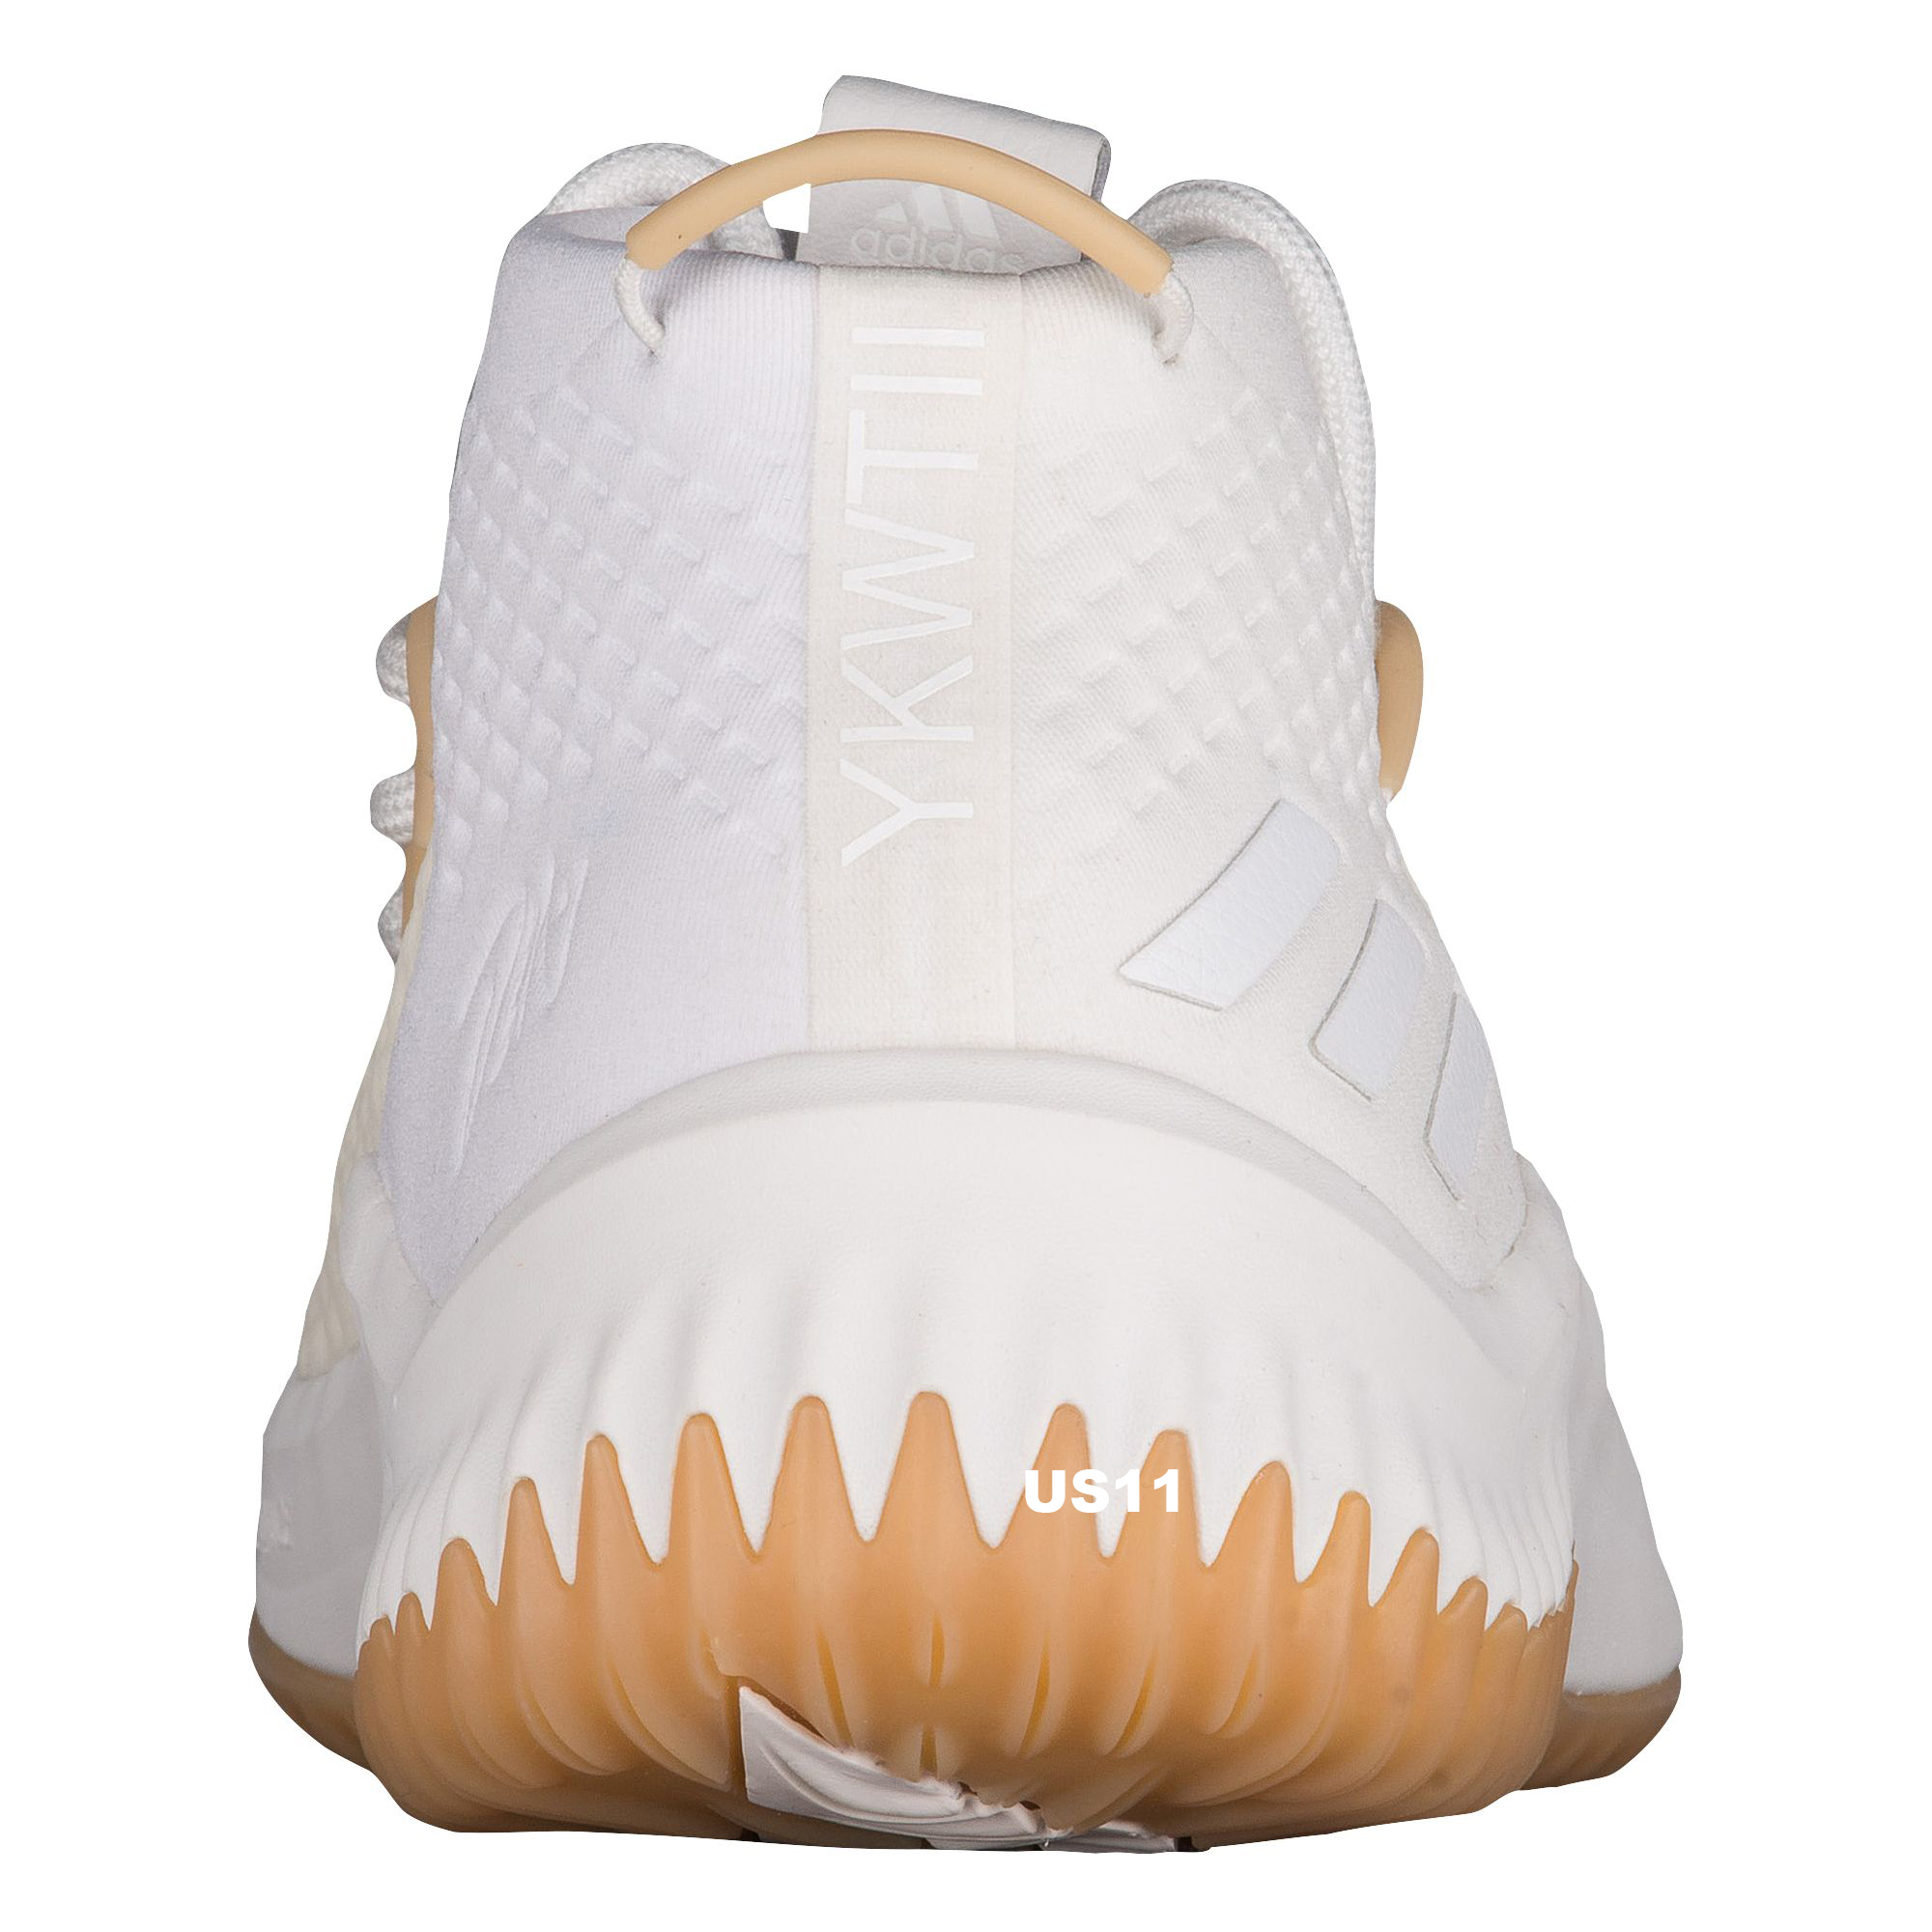 adidas dame 4 off white gum 5 - WearTesters